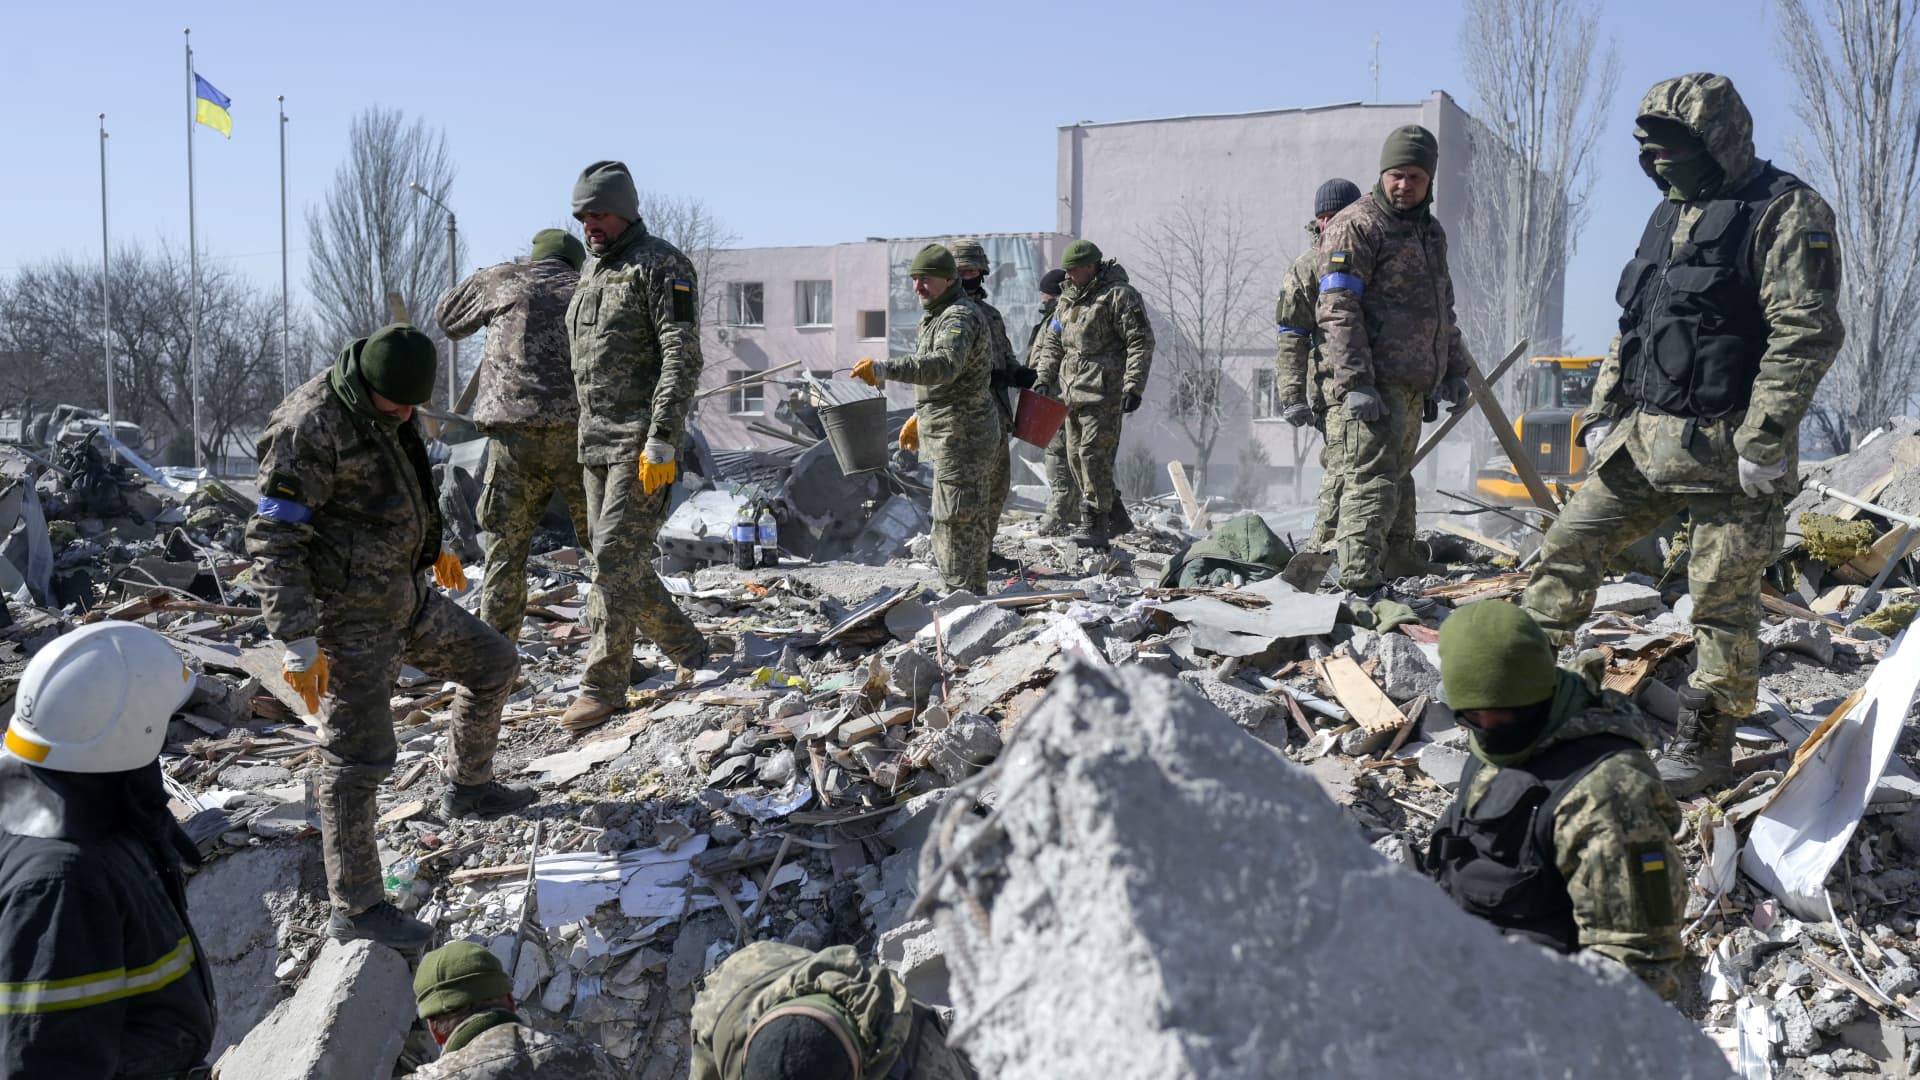 Ukrainian soldiers search for bodies in the debris at the military school hit by Russian rockets the day before, in Mykolaiv, southern Ukraine, on March 19, 2022.